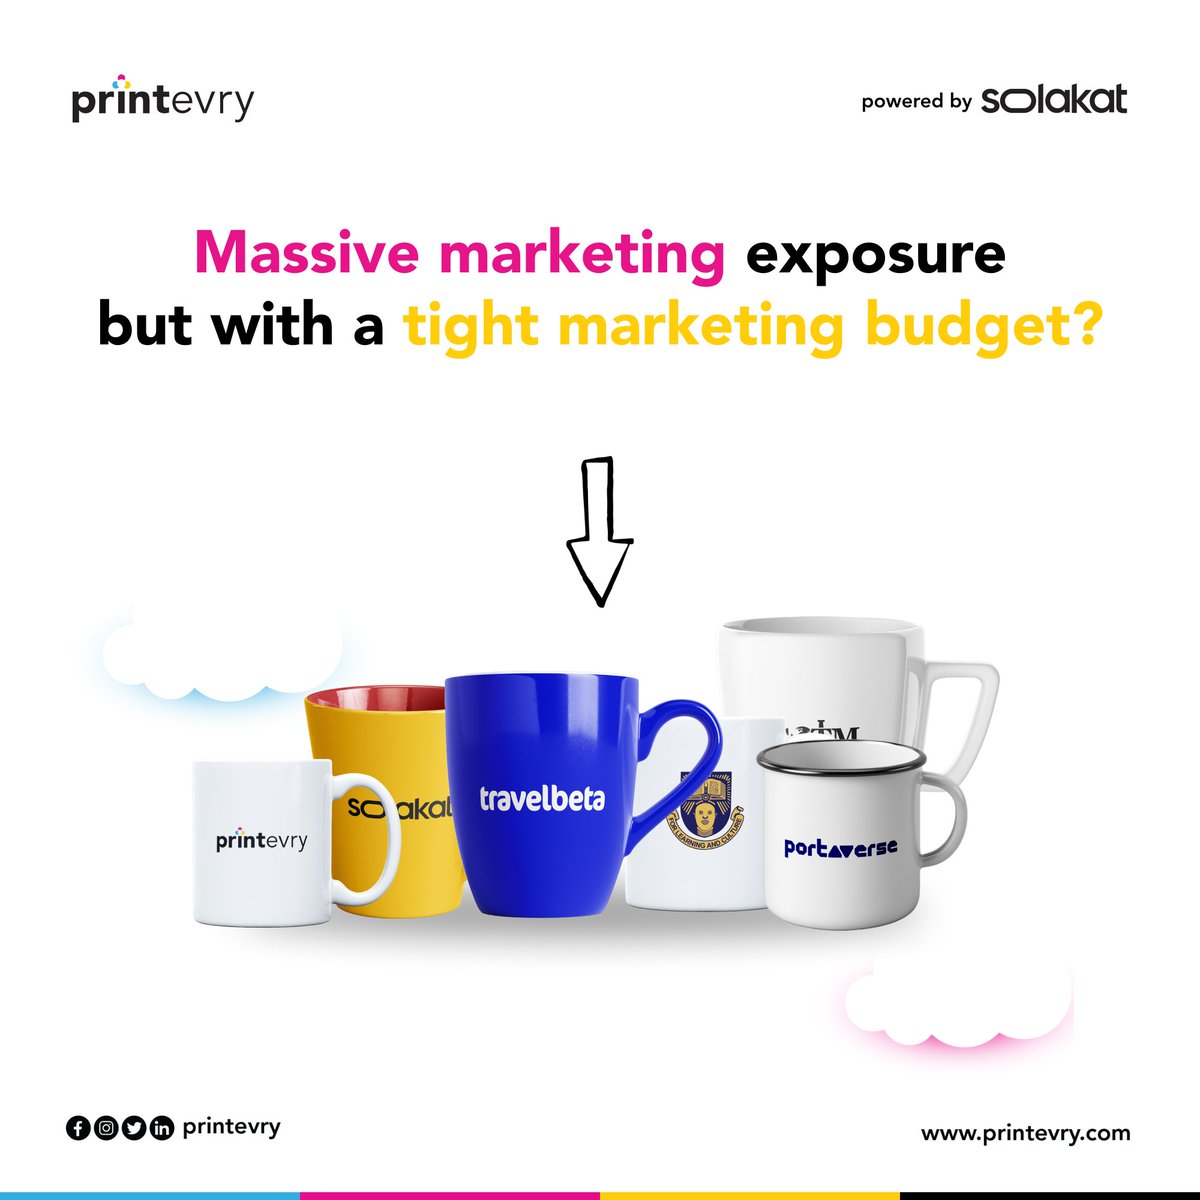 Custom Mugs are always in constant use. They drive massive brand exposure and make it easy for your customers to remember your brand.

Would you like to book a free consultation with us today?

#Printevry #Printingandbranding #Customizedmugs